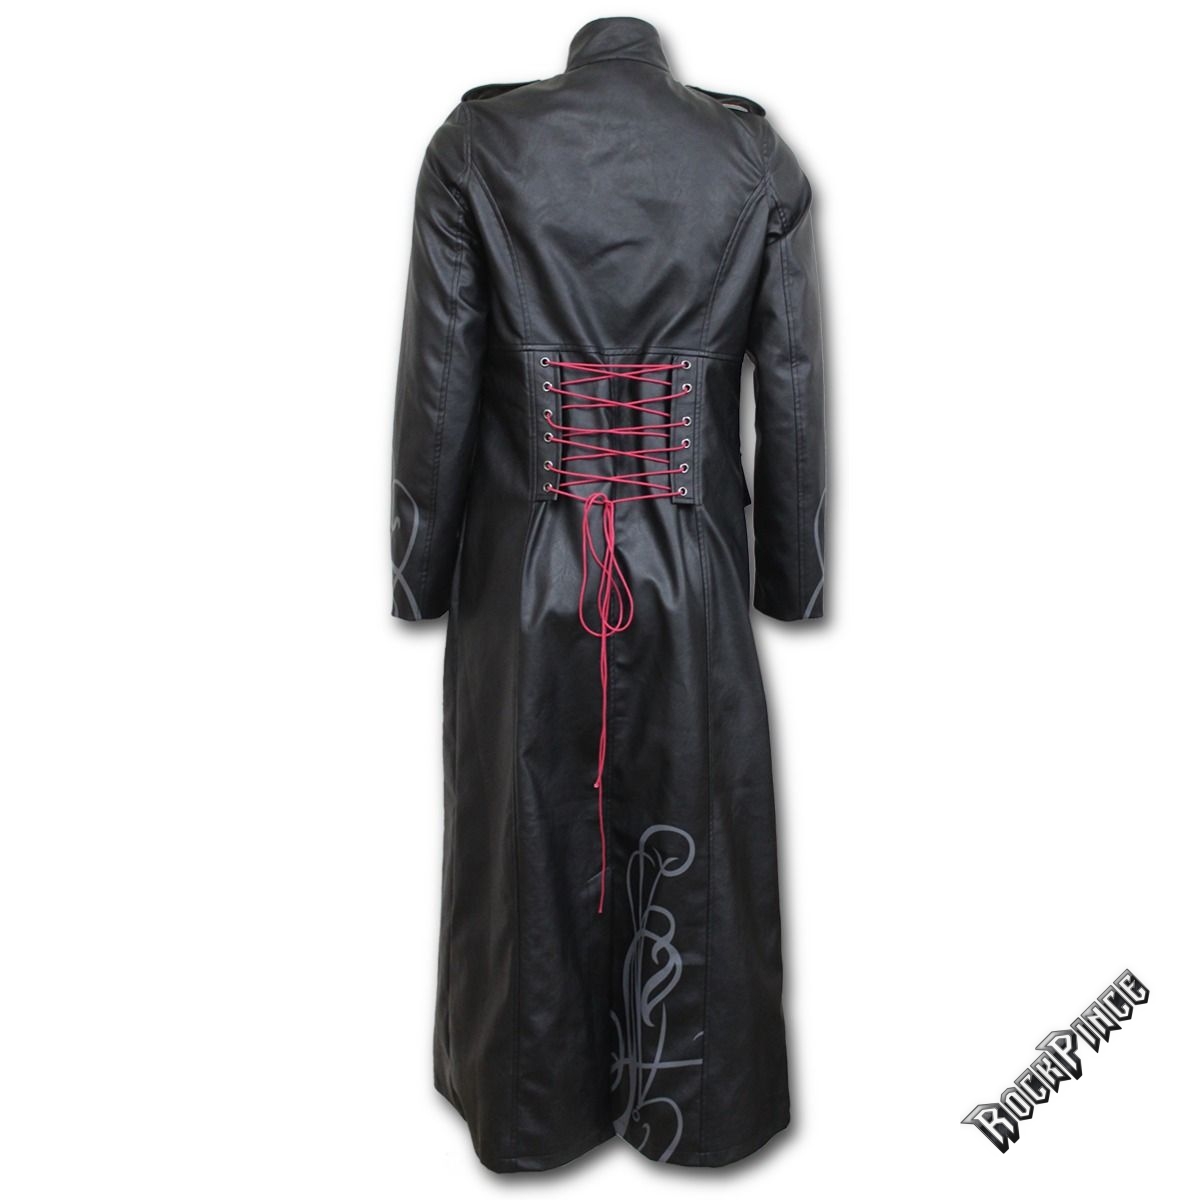 JUST TRIBAL - Gothic Trench Coat PU-Leather Corset Back (Plain) - T139G406